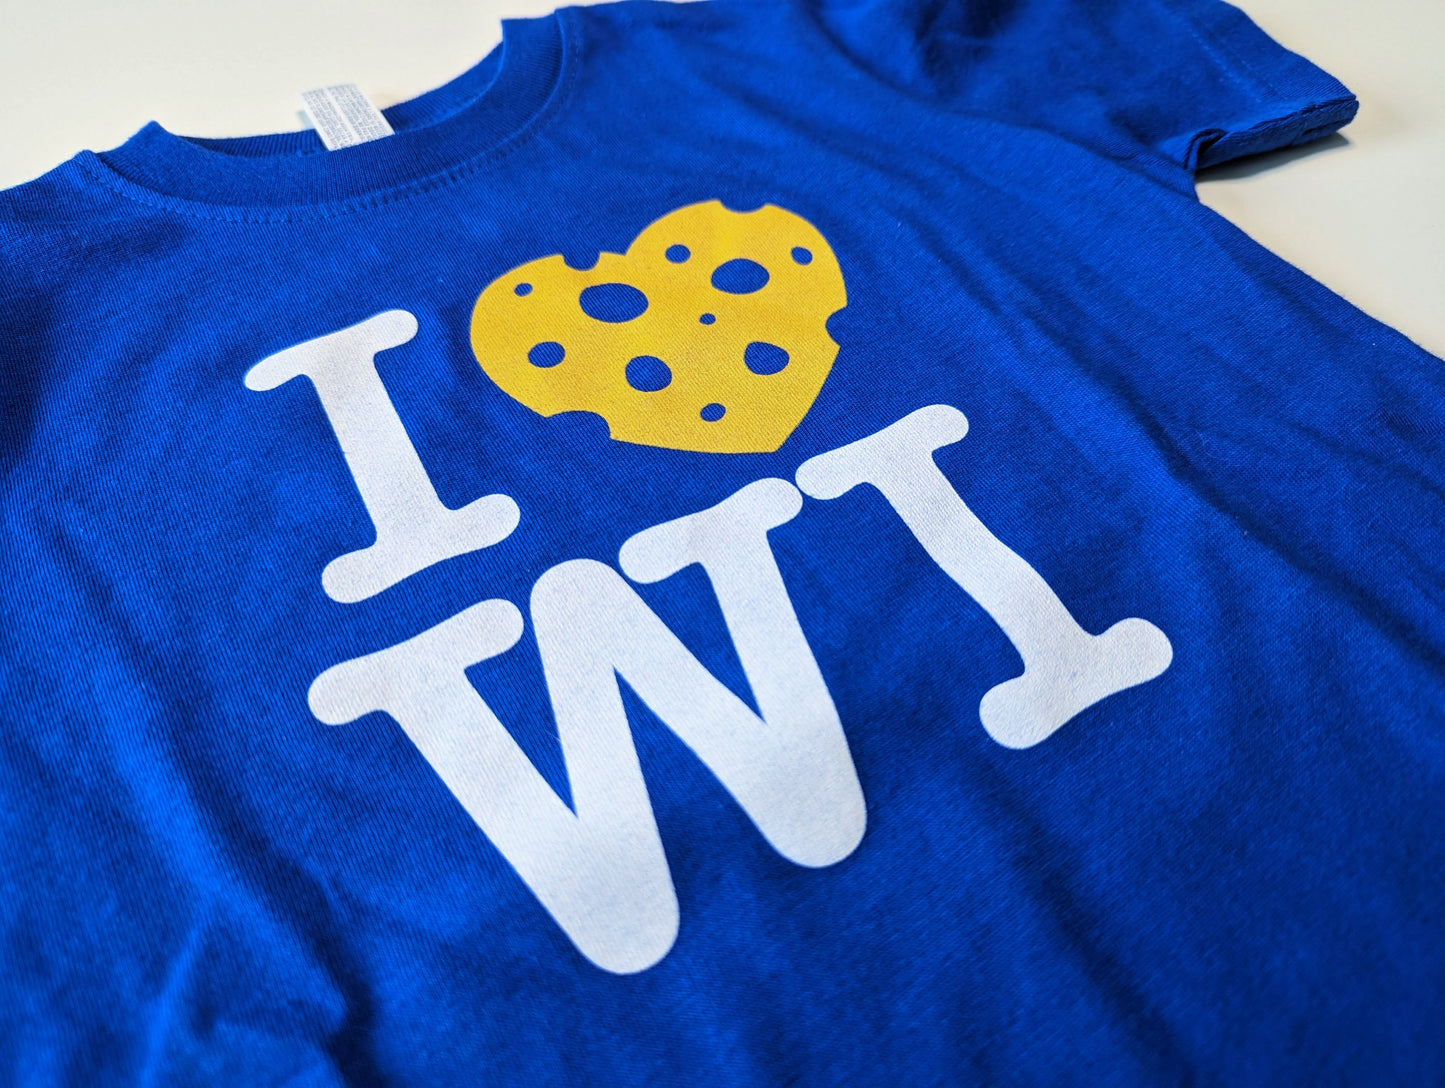 I Love WI - Wisconsin Travel for Kids Screen Printed Shirt